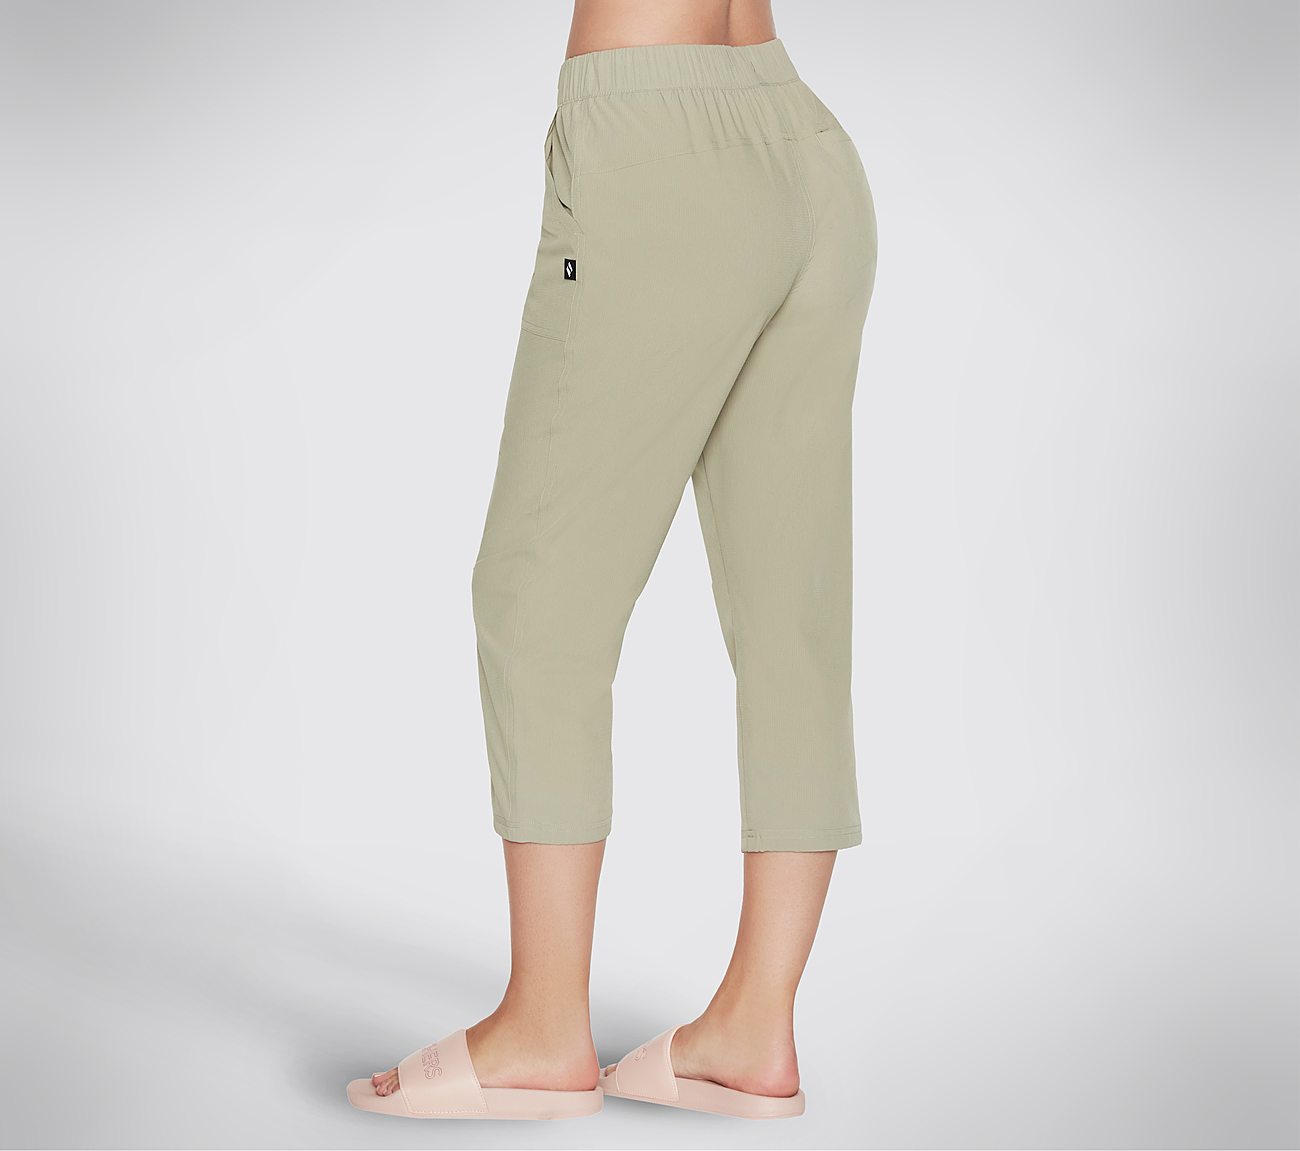 INCLINE MIDCALF PANT, GREEN/WHITE Apparels Top View